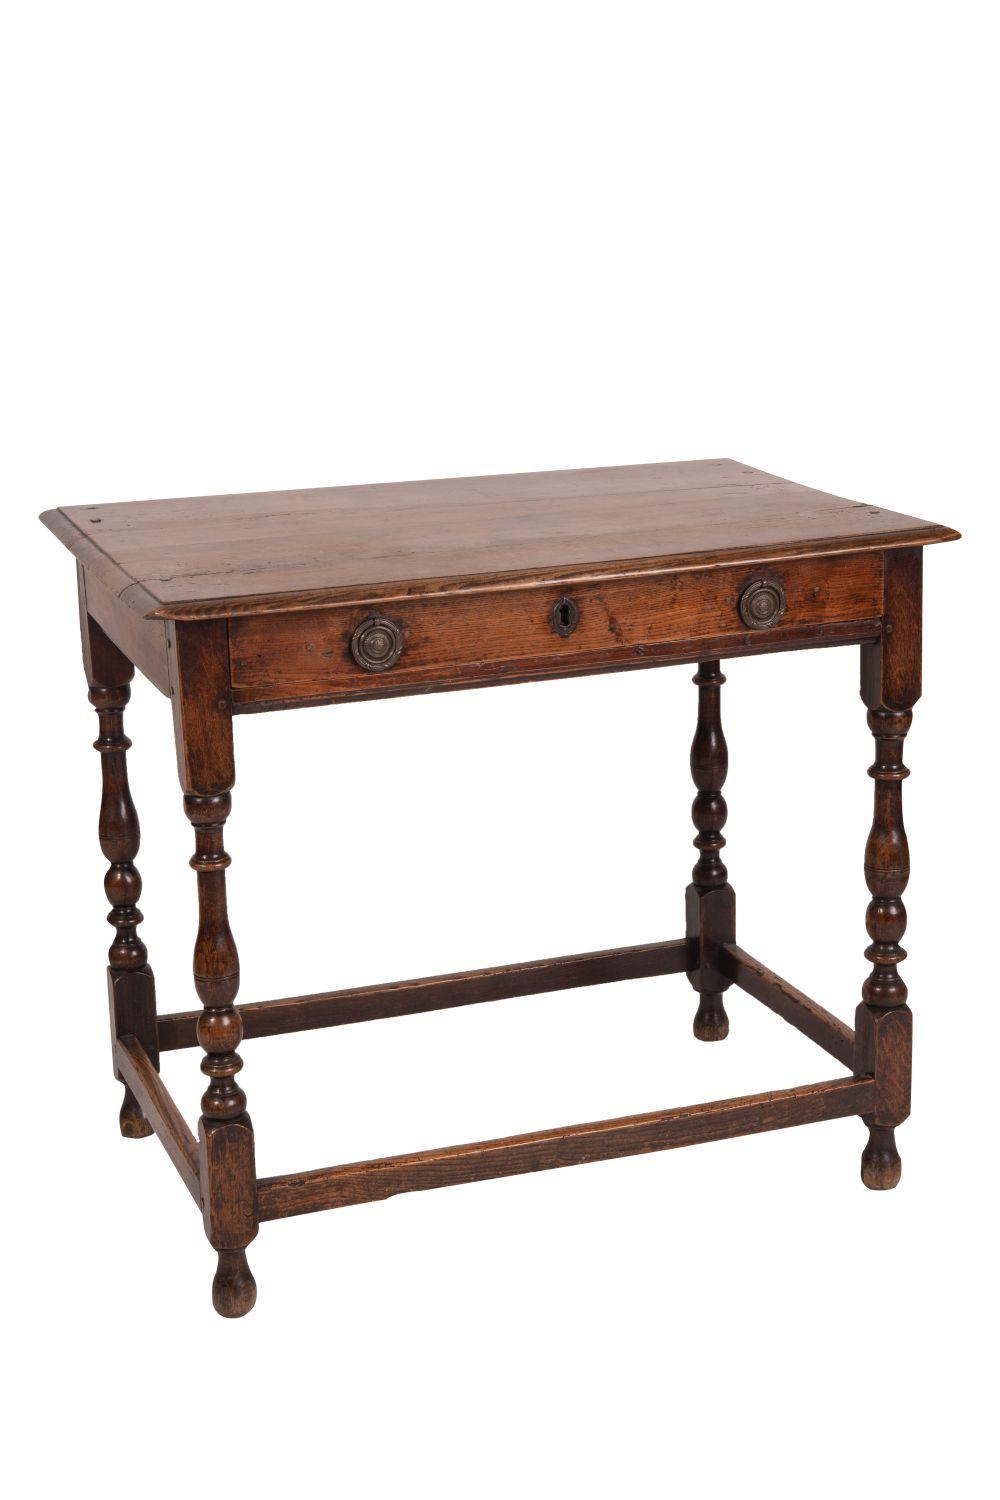 COUNTRY ENGLISH CARVED OAK TABLEwith 335a29